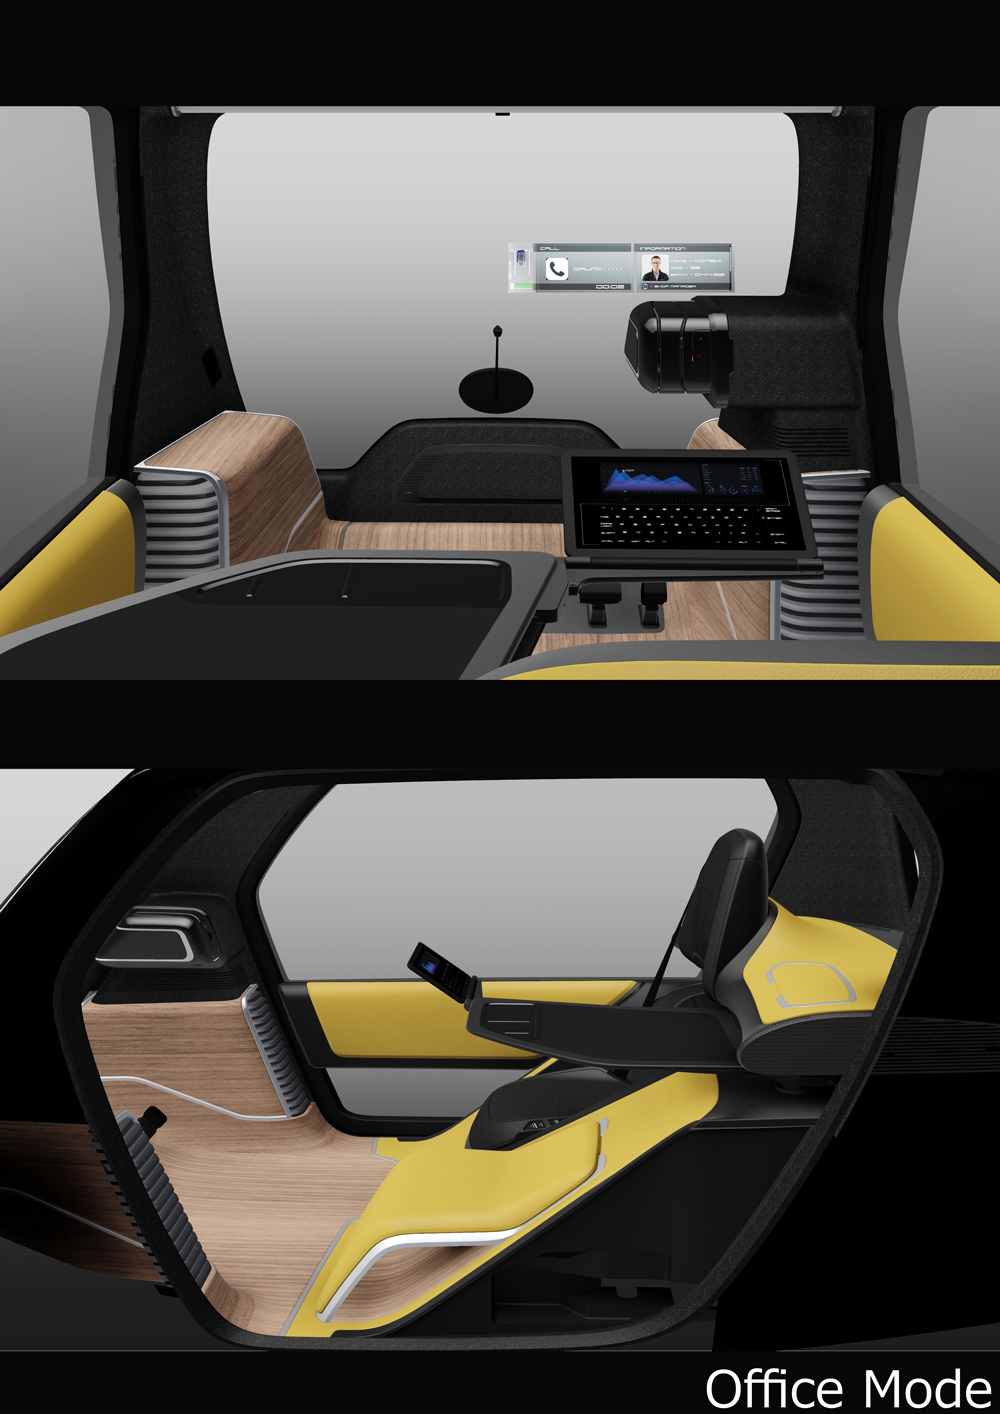 Toyota S Ultra Compact Concept City Car Doubles Up As A Mobile Office